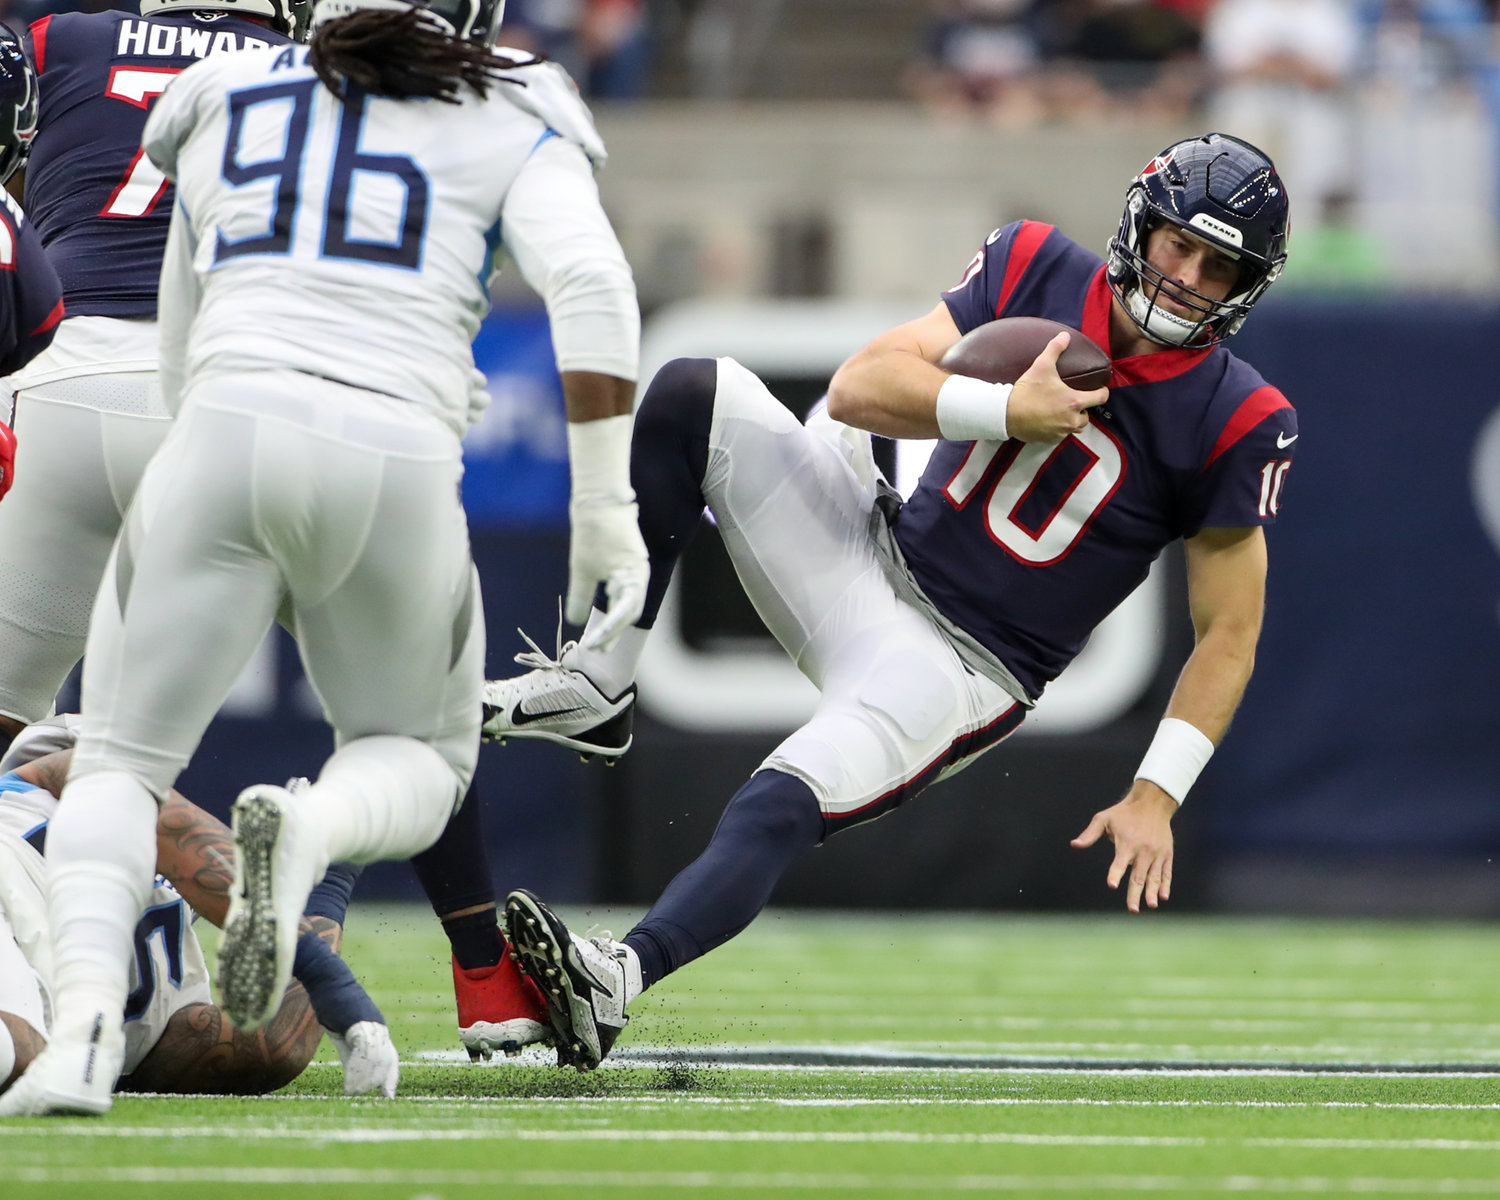 Houston Texans quarterback Davis Mills (10) is sacked during an NFL game between the Texans and the Titans on Jan. 9, 2022 in Houston, Texas.